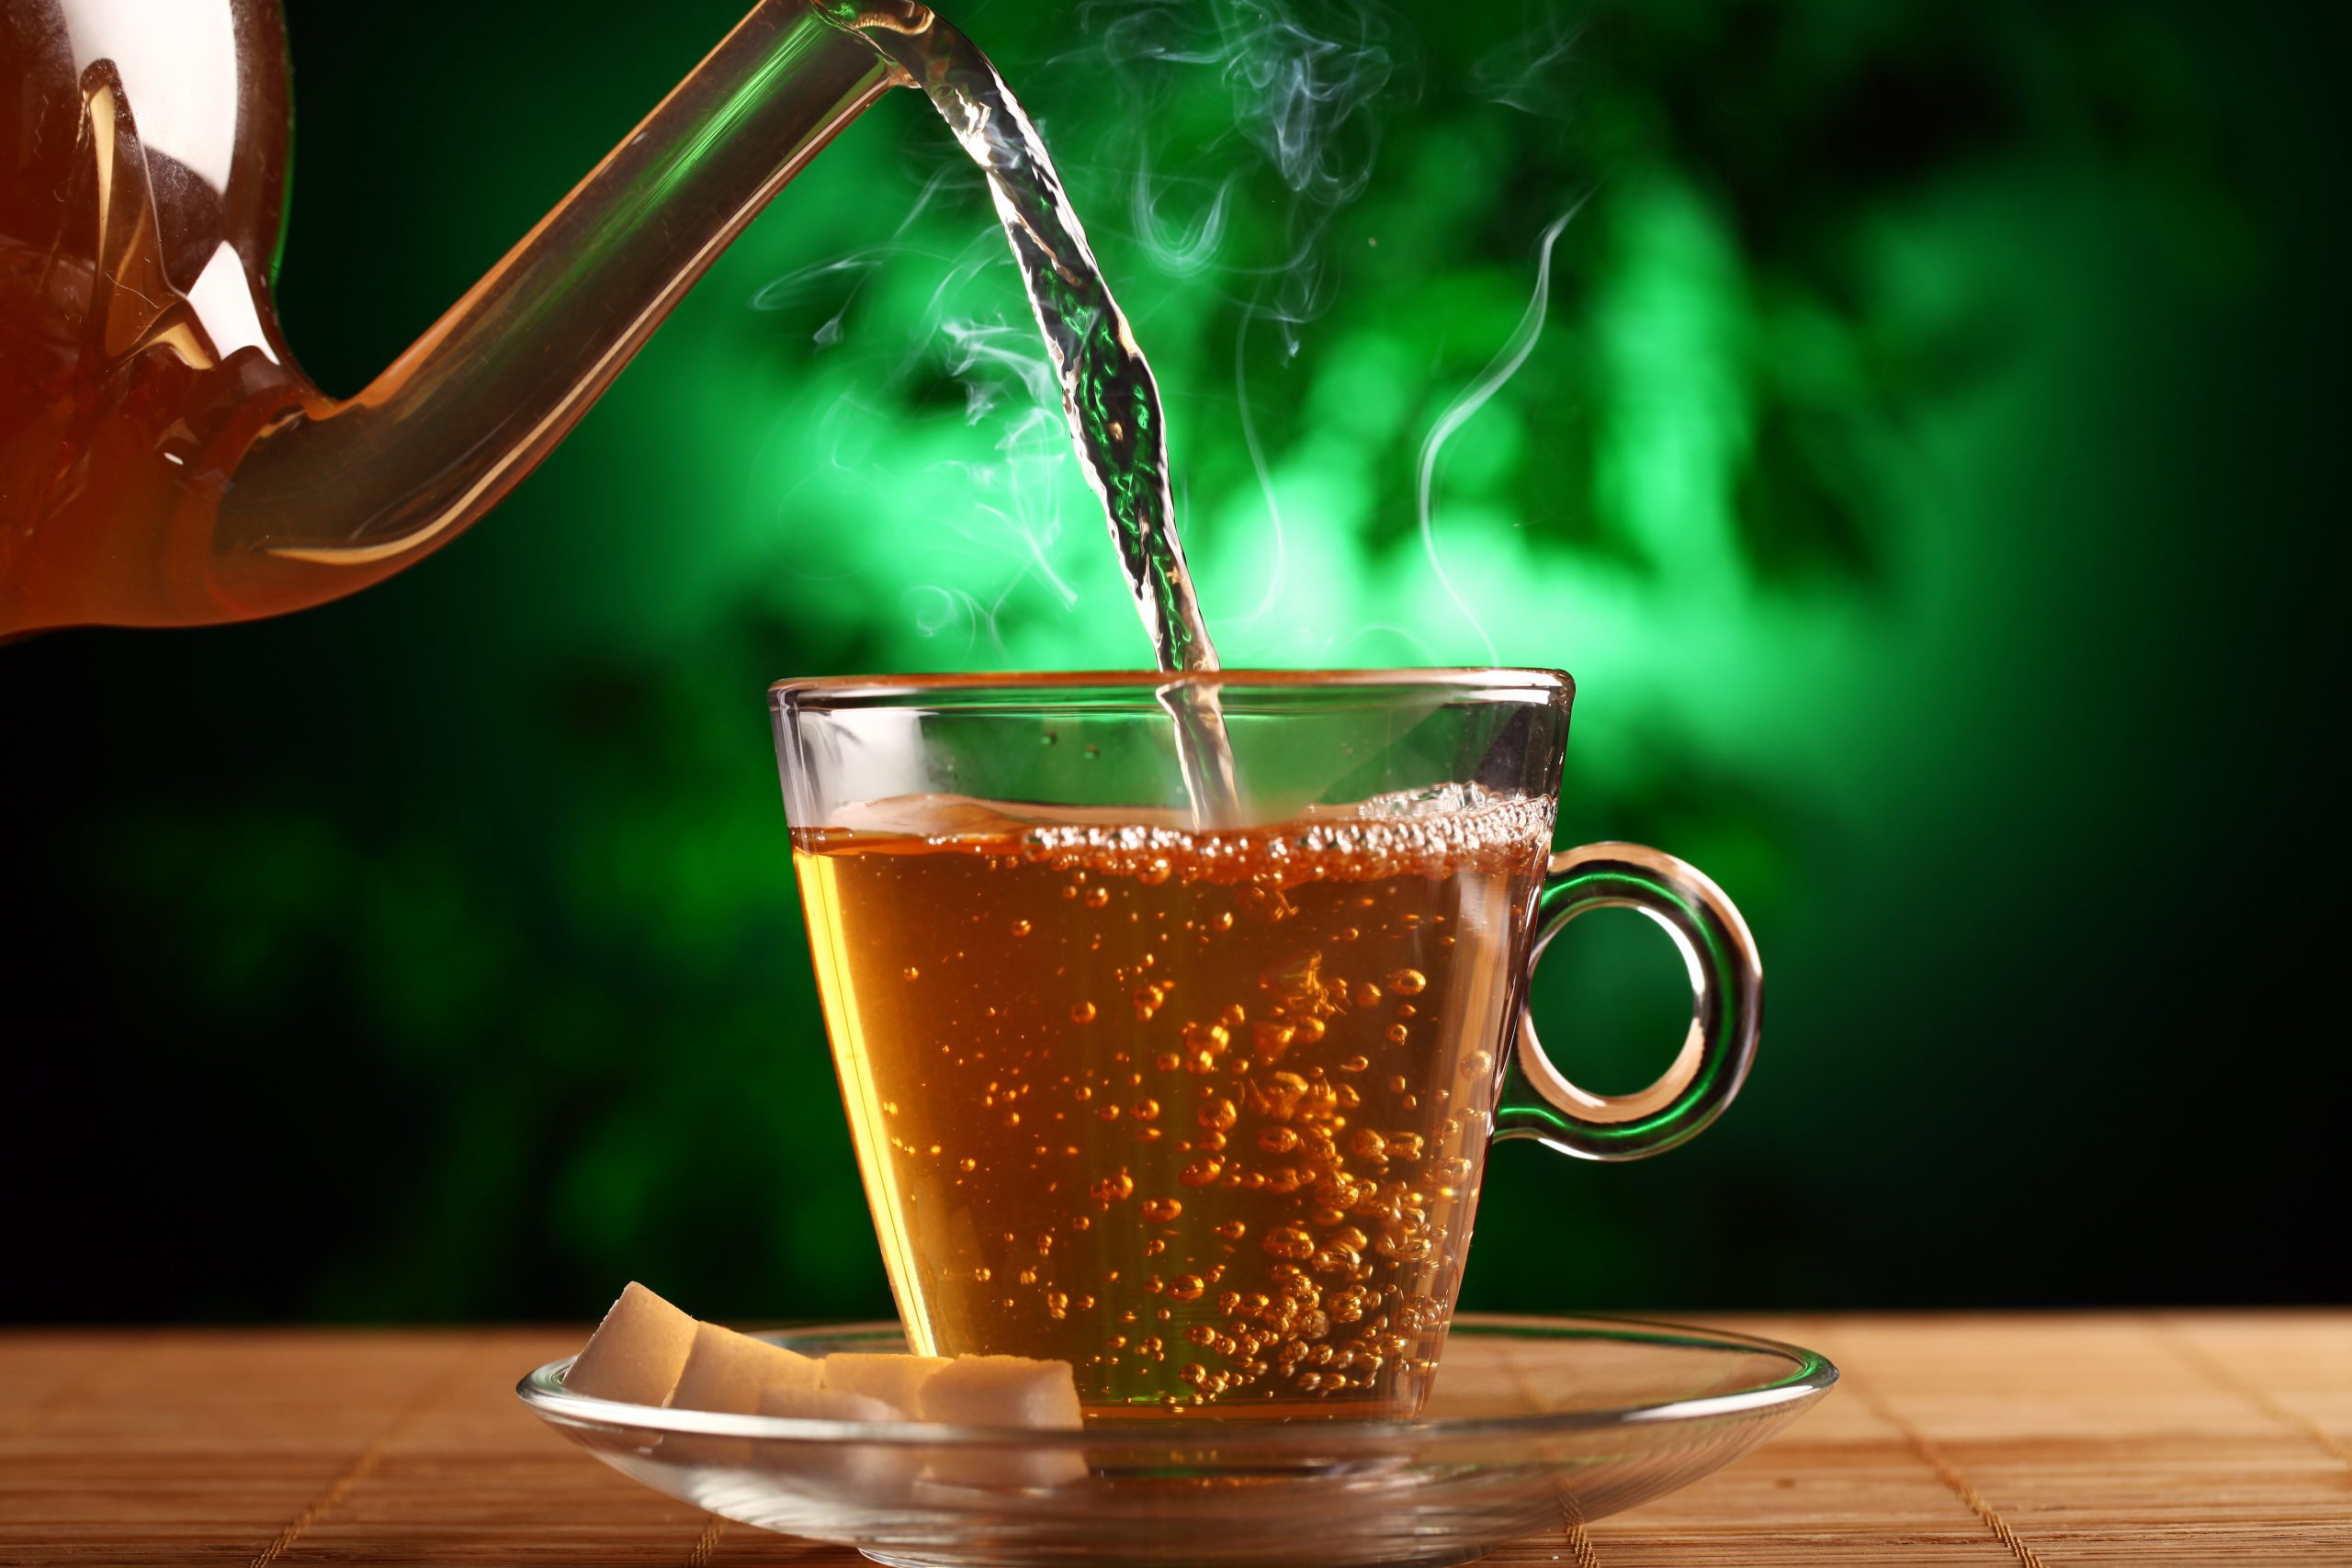 Paradoxical benefits of green tea named